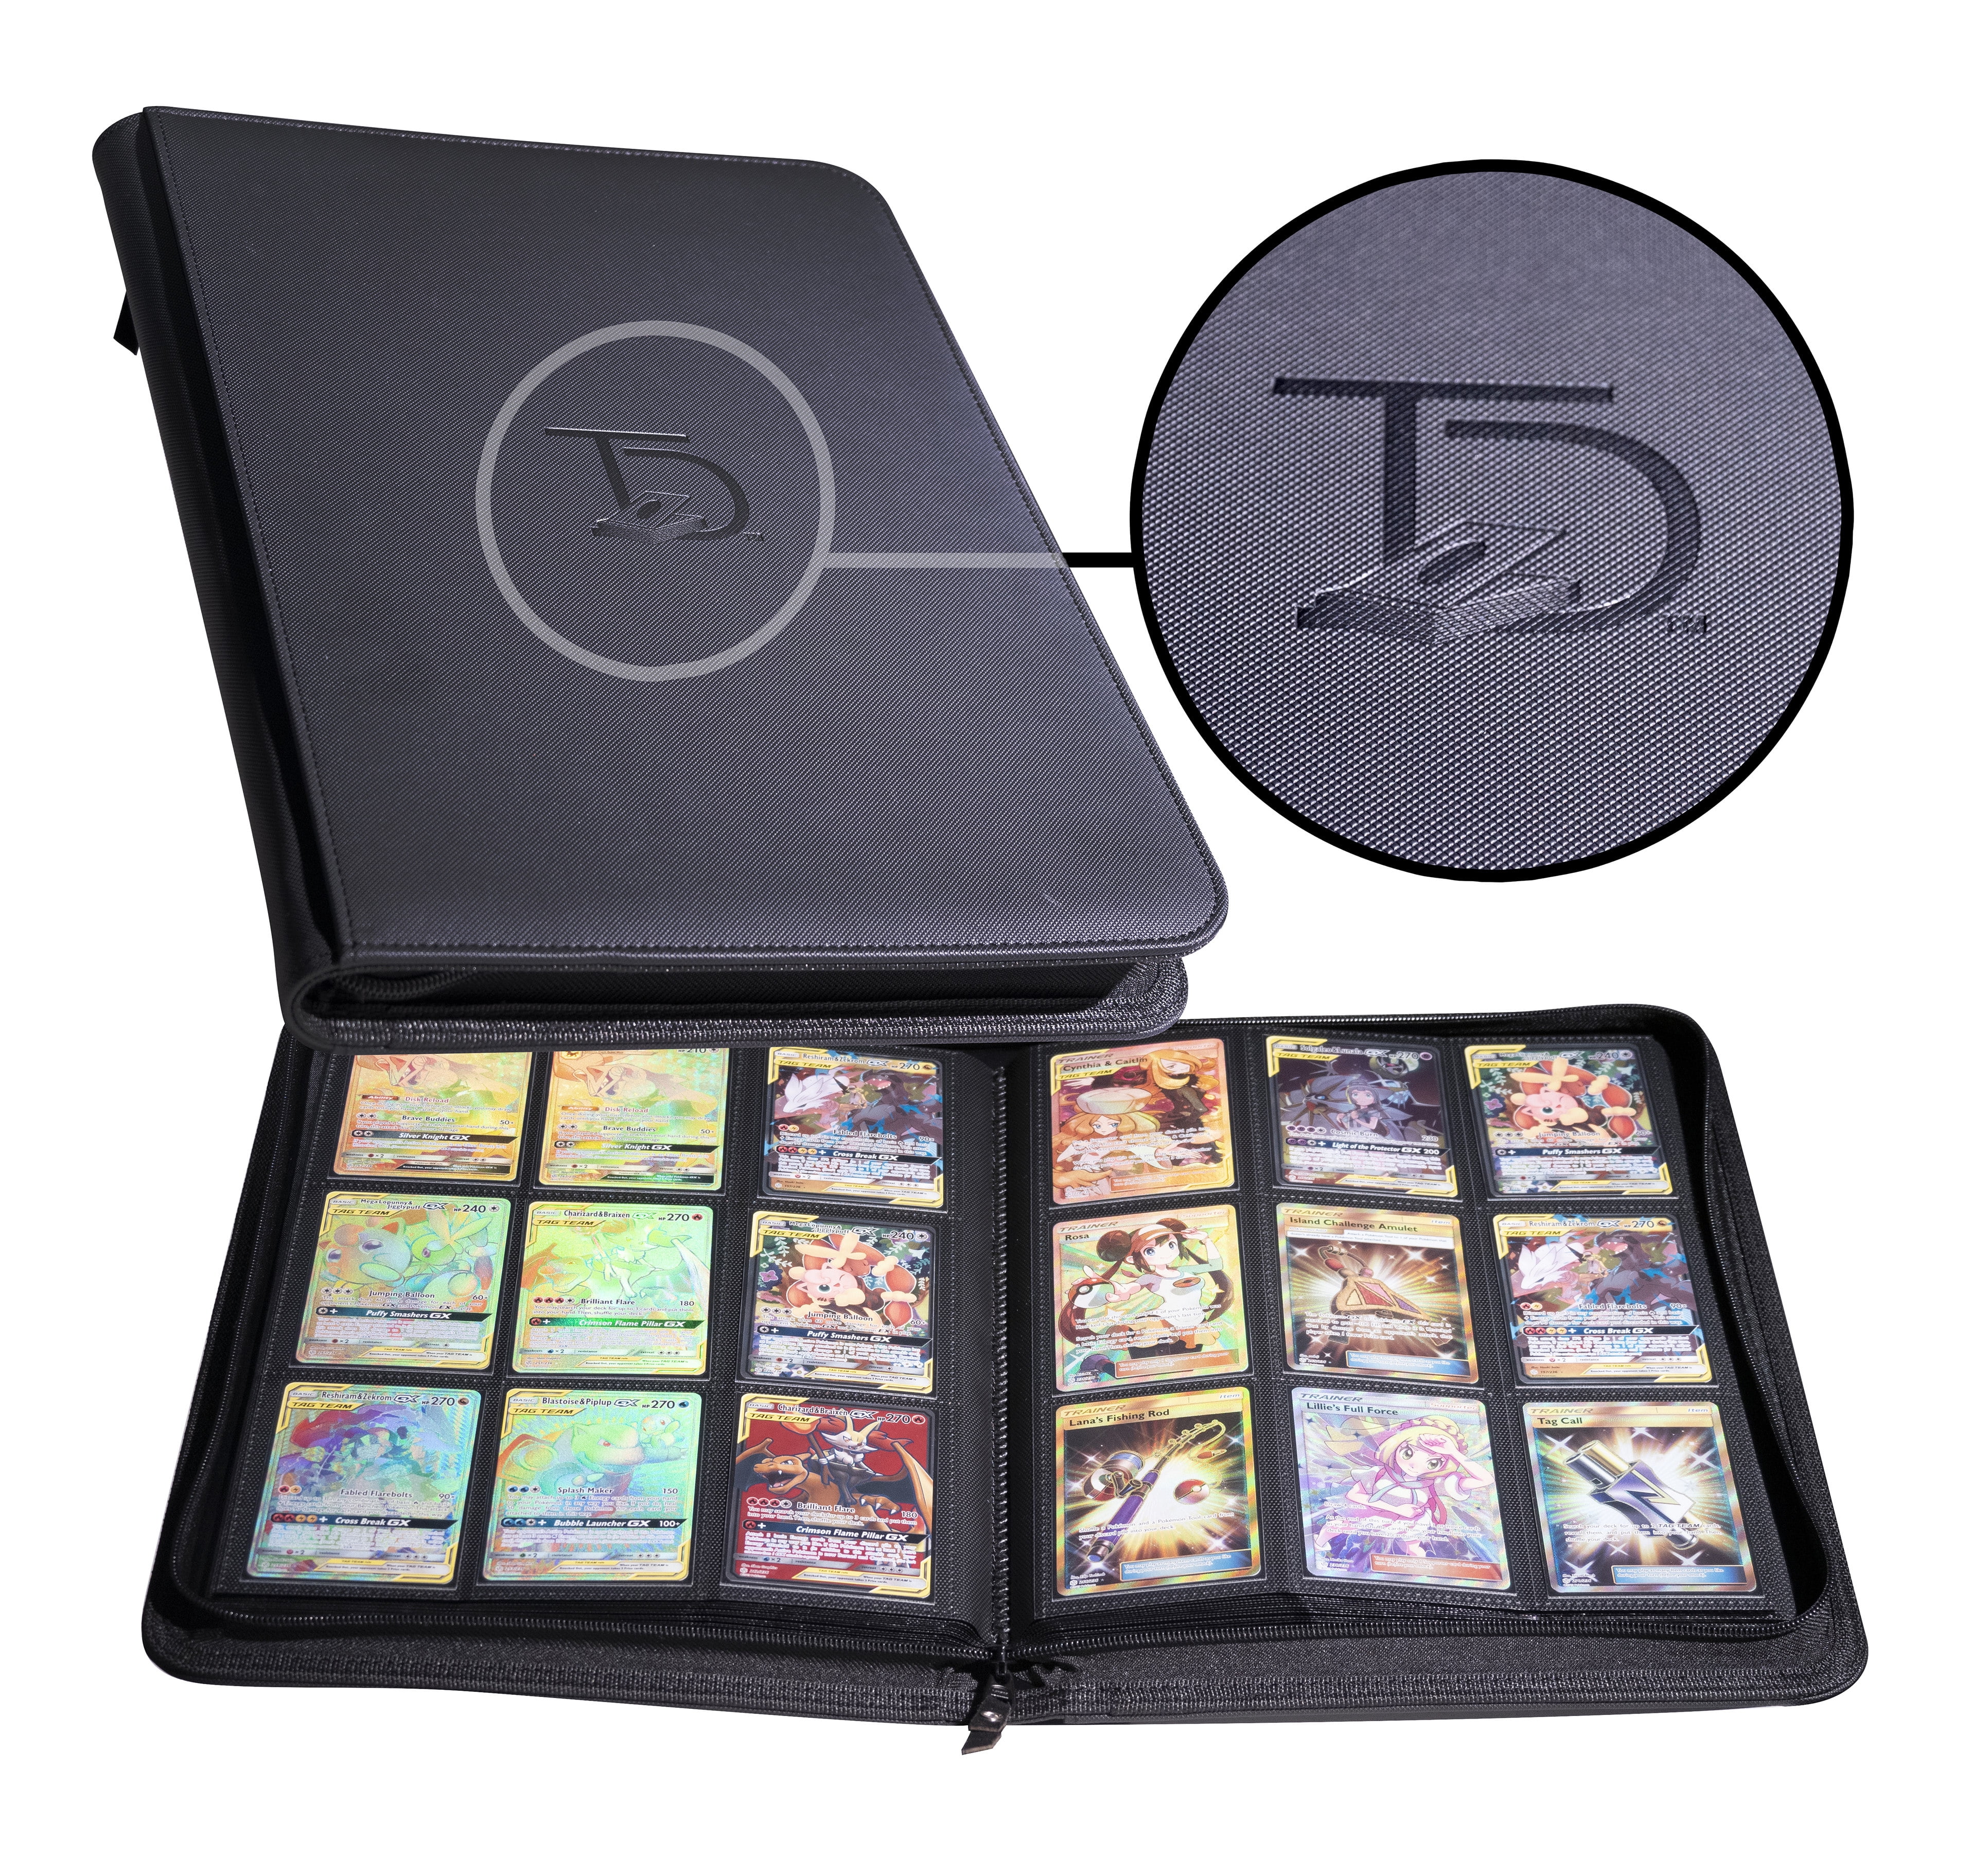 Card Binder 9 Pocket Trading Card Binder with Sleeves Sports Card Binder Collectible Trading Card Albums Fits 900 Cards with 50 Removable Sleeves Baseball Card Binder 